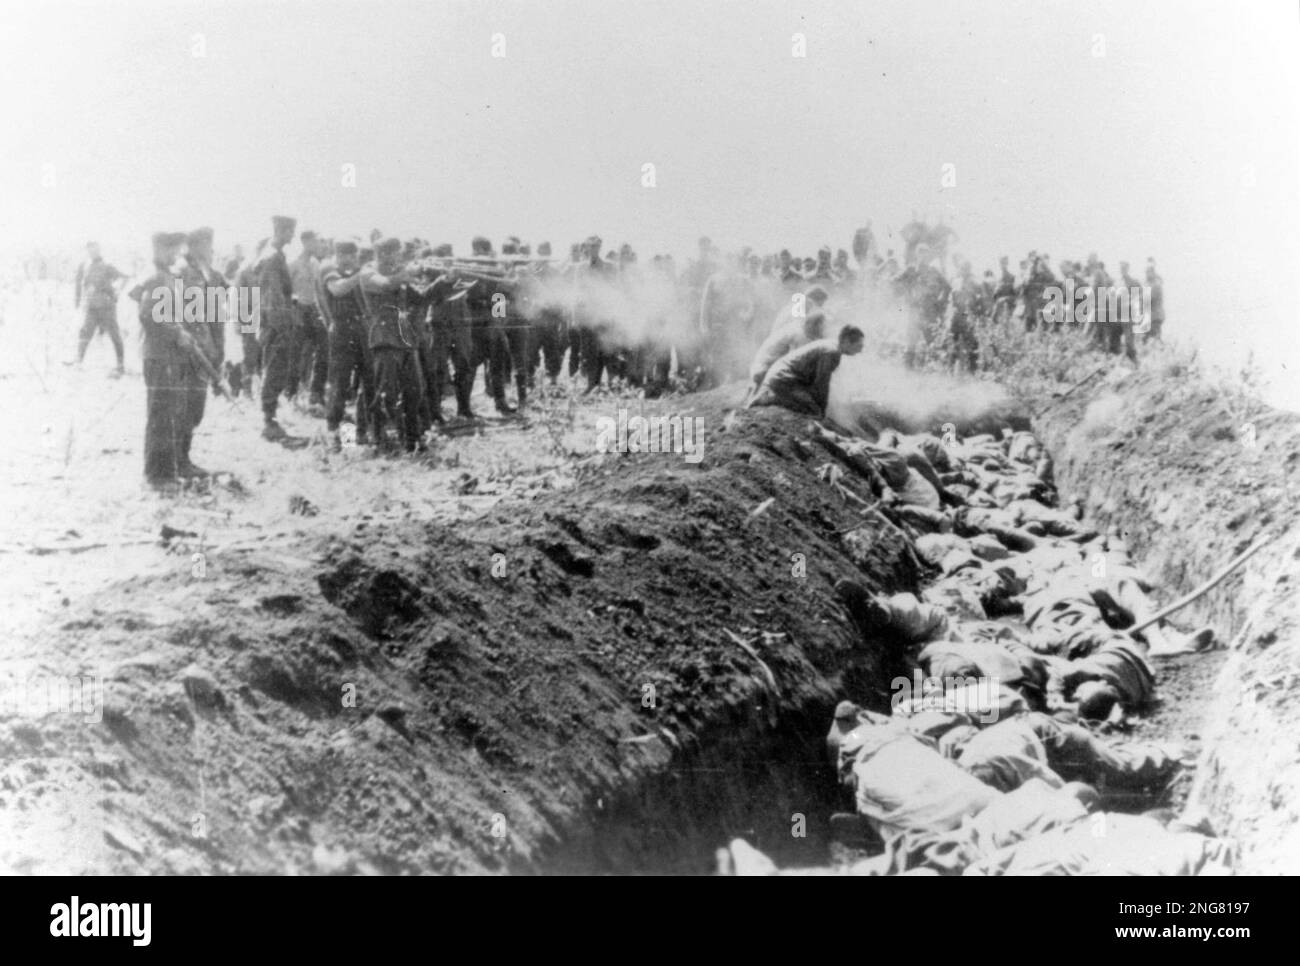 The early phase of the Holocaust was not with gas chambers but mobile execution squads known as Enisatzgruppen. Their task was to roam behind teh front lines shooting all the Jews they could. They killed an estimated  two million people.  This photo shows the men firing at their victims kneeling by a ditch into which their bodies will fall. Stock Photo